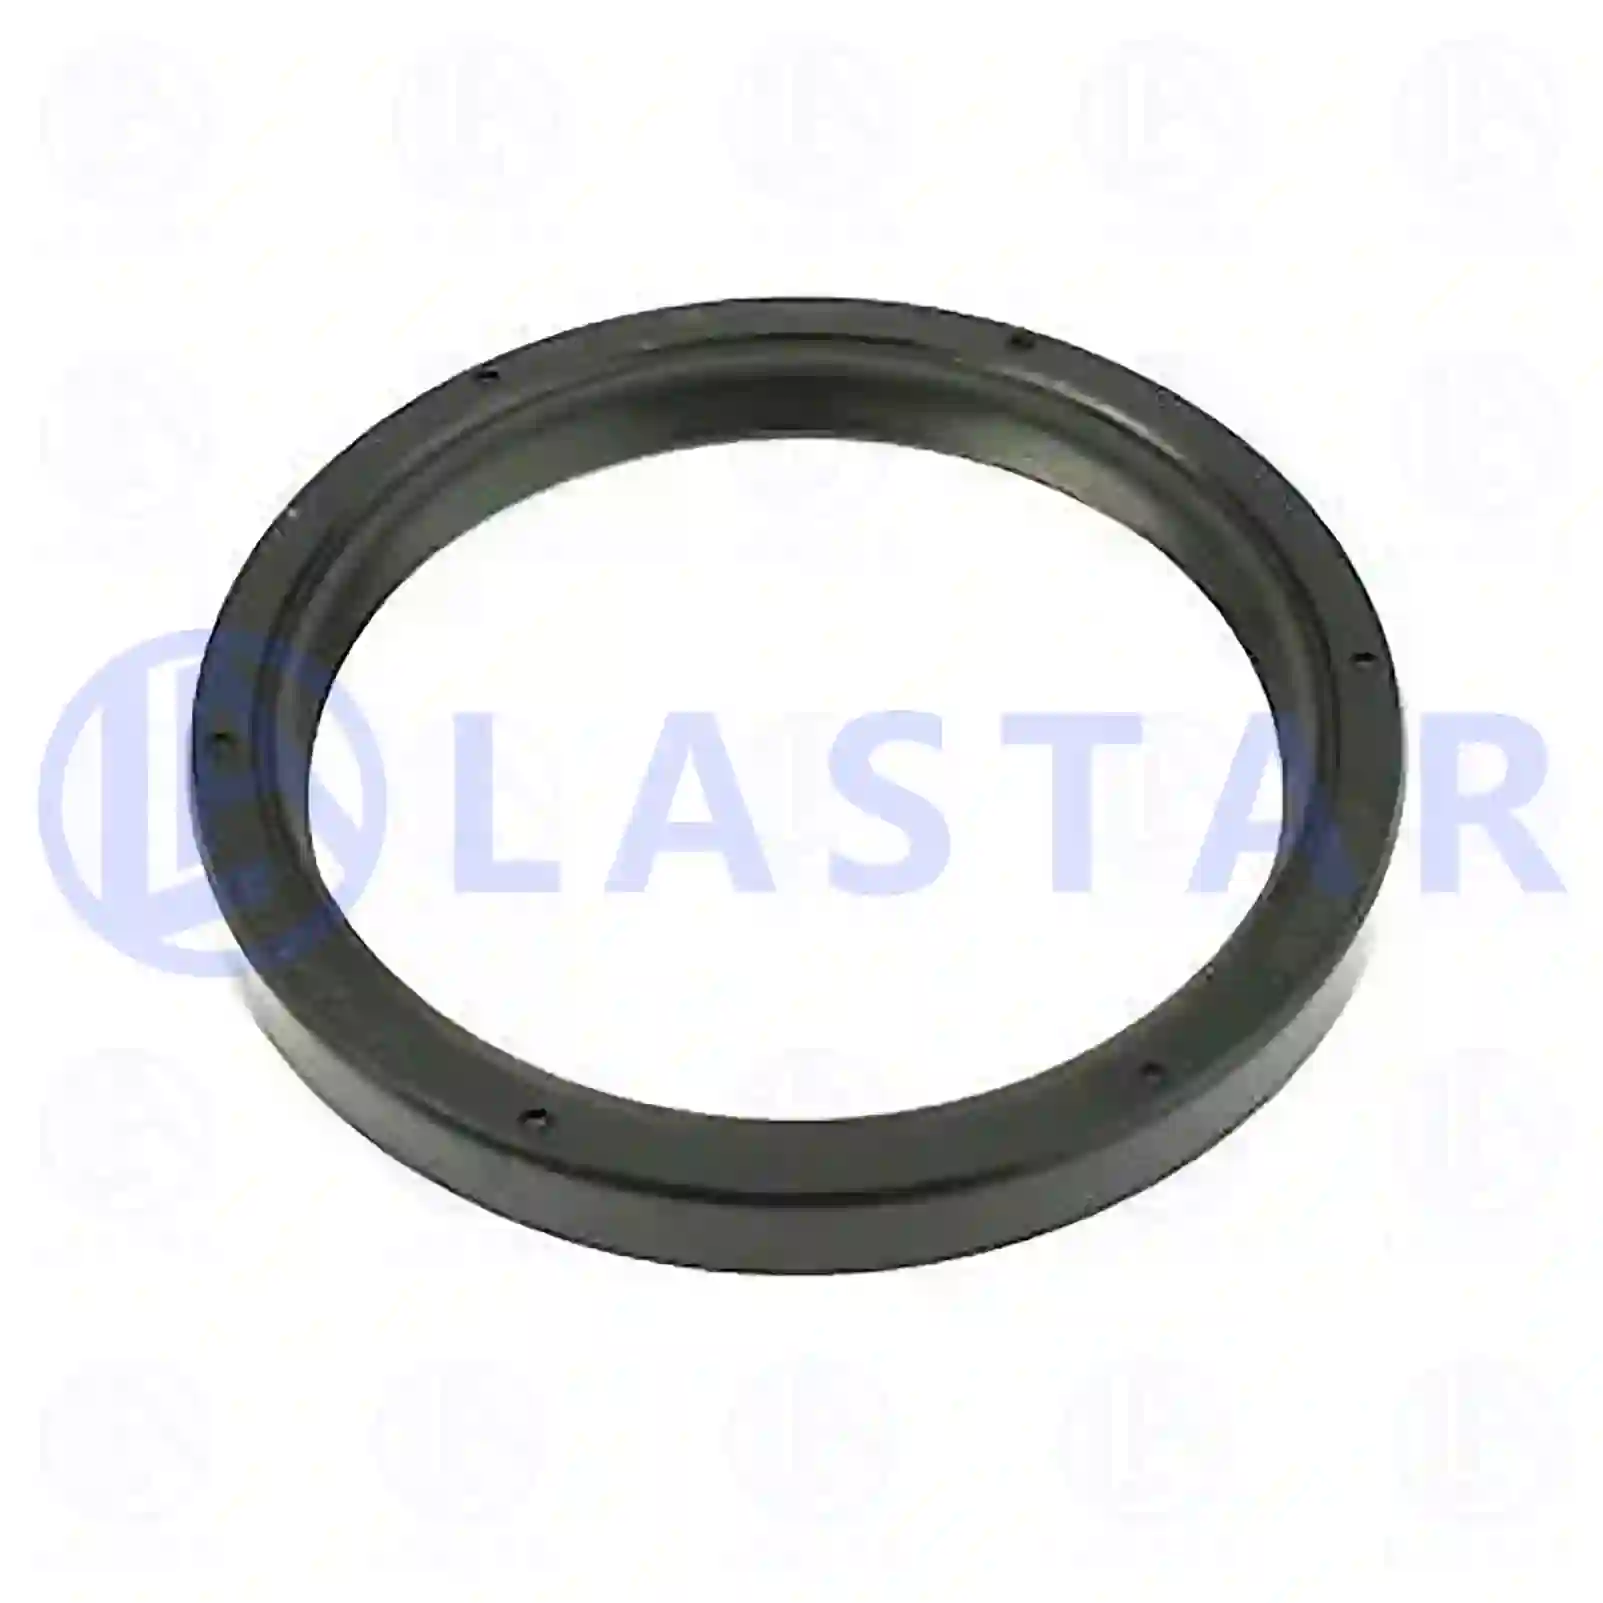 Support Bearing Oil seal, la no: 77734427 ,  oem no:294275, , Lastar Spare Part | Truck Spare Parts, Auotomotive Spare Parts